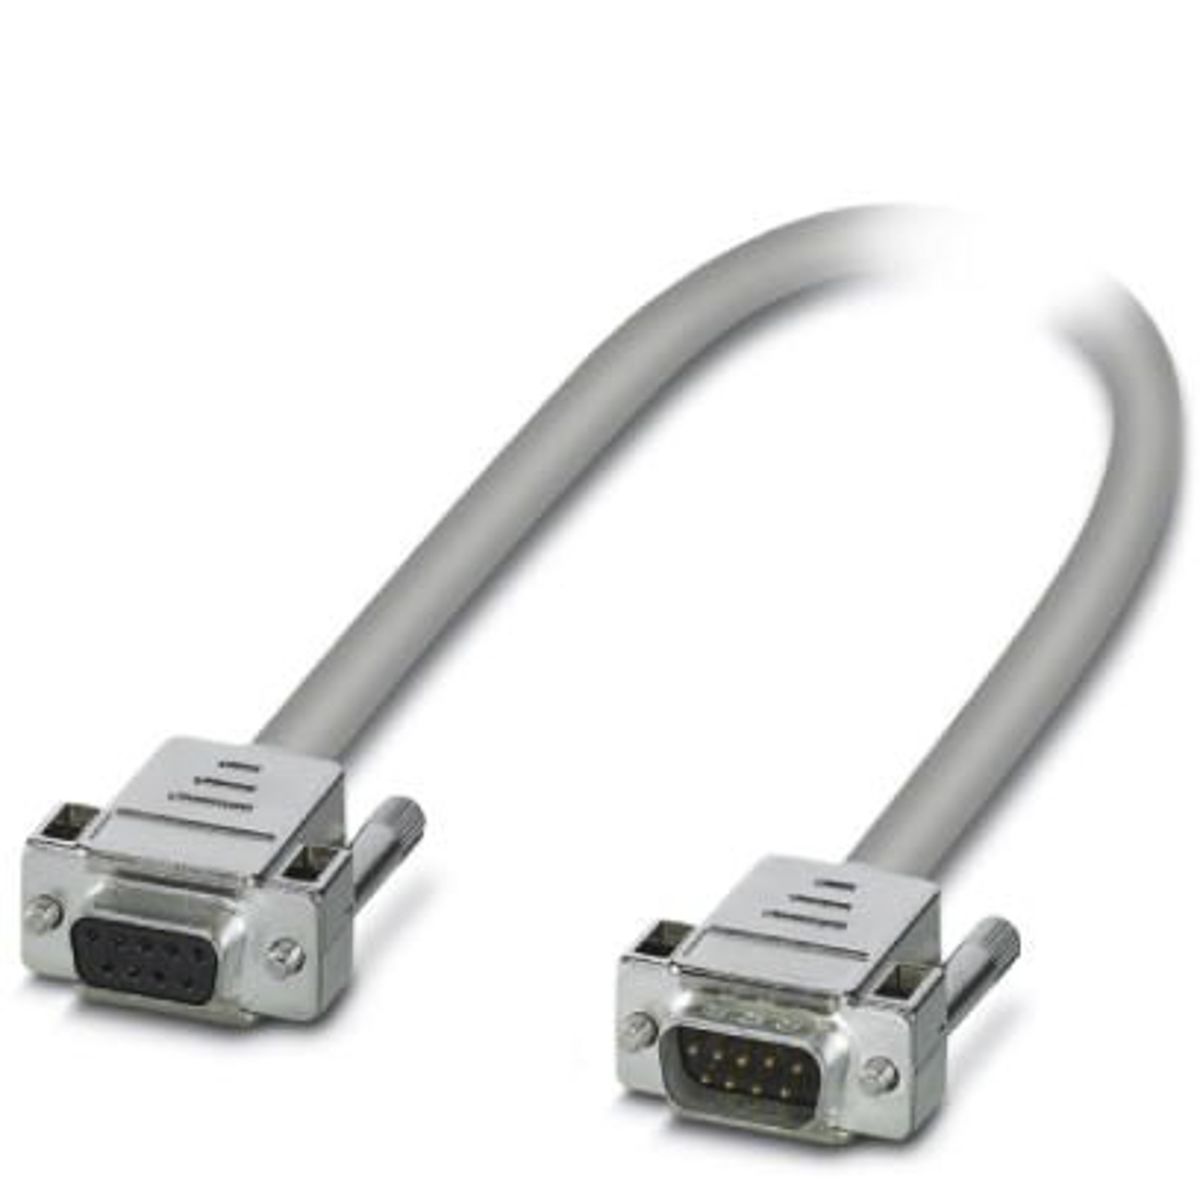 Phoenix Contact 2m 9 pin D-sub to 9 pin D-sub Serial Cable